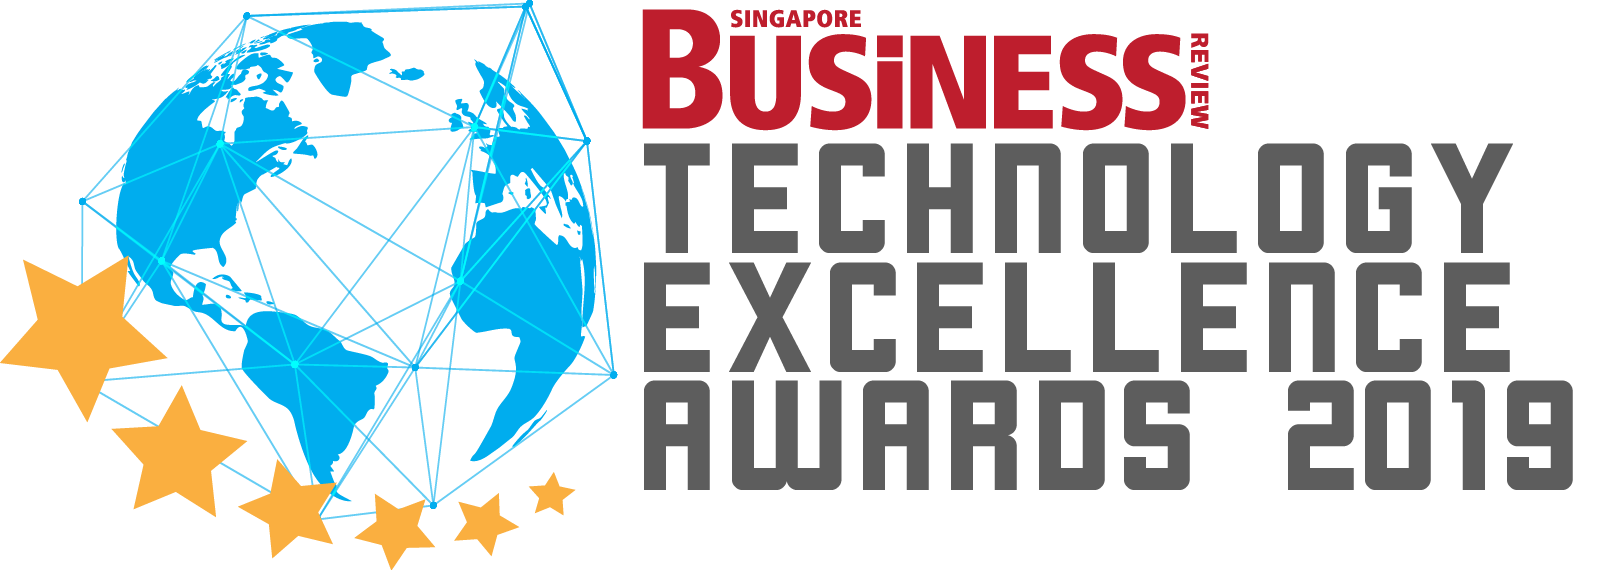 “Best Connectivity for Financial Services” – Singapore Business Review Technology Excellence Awards 2019